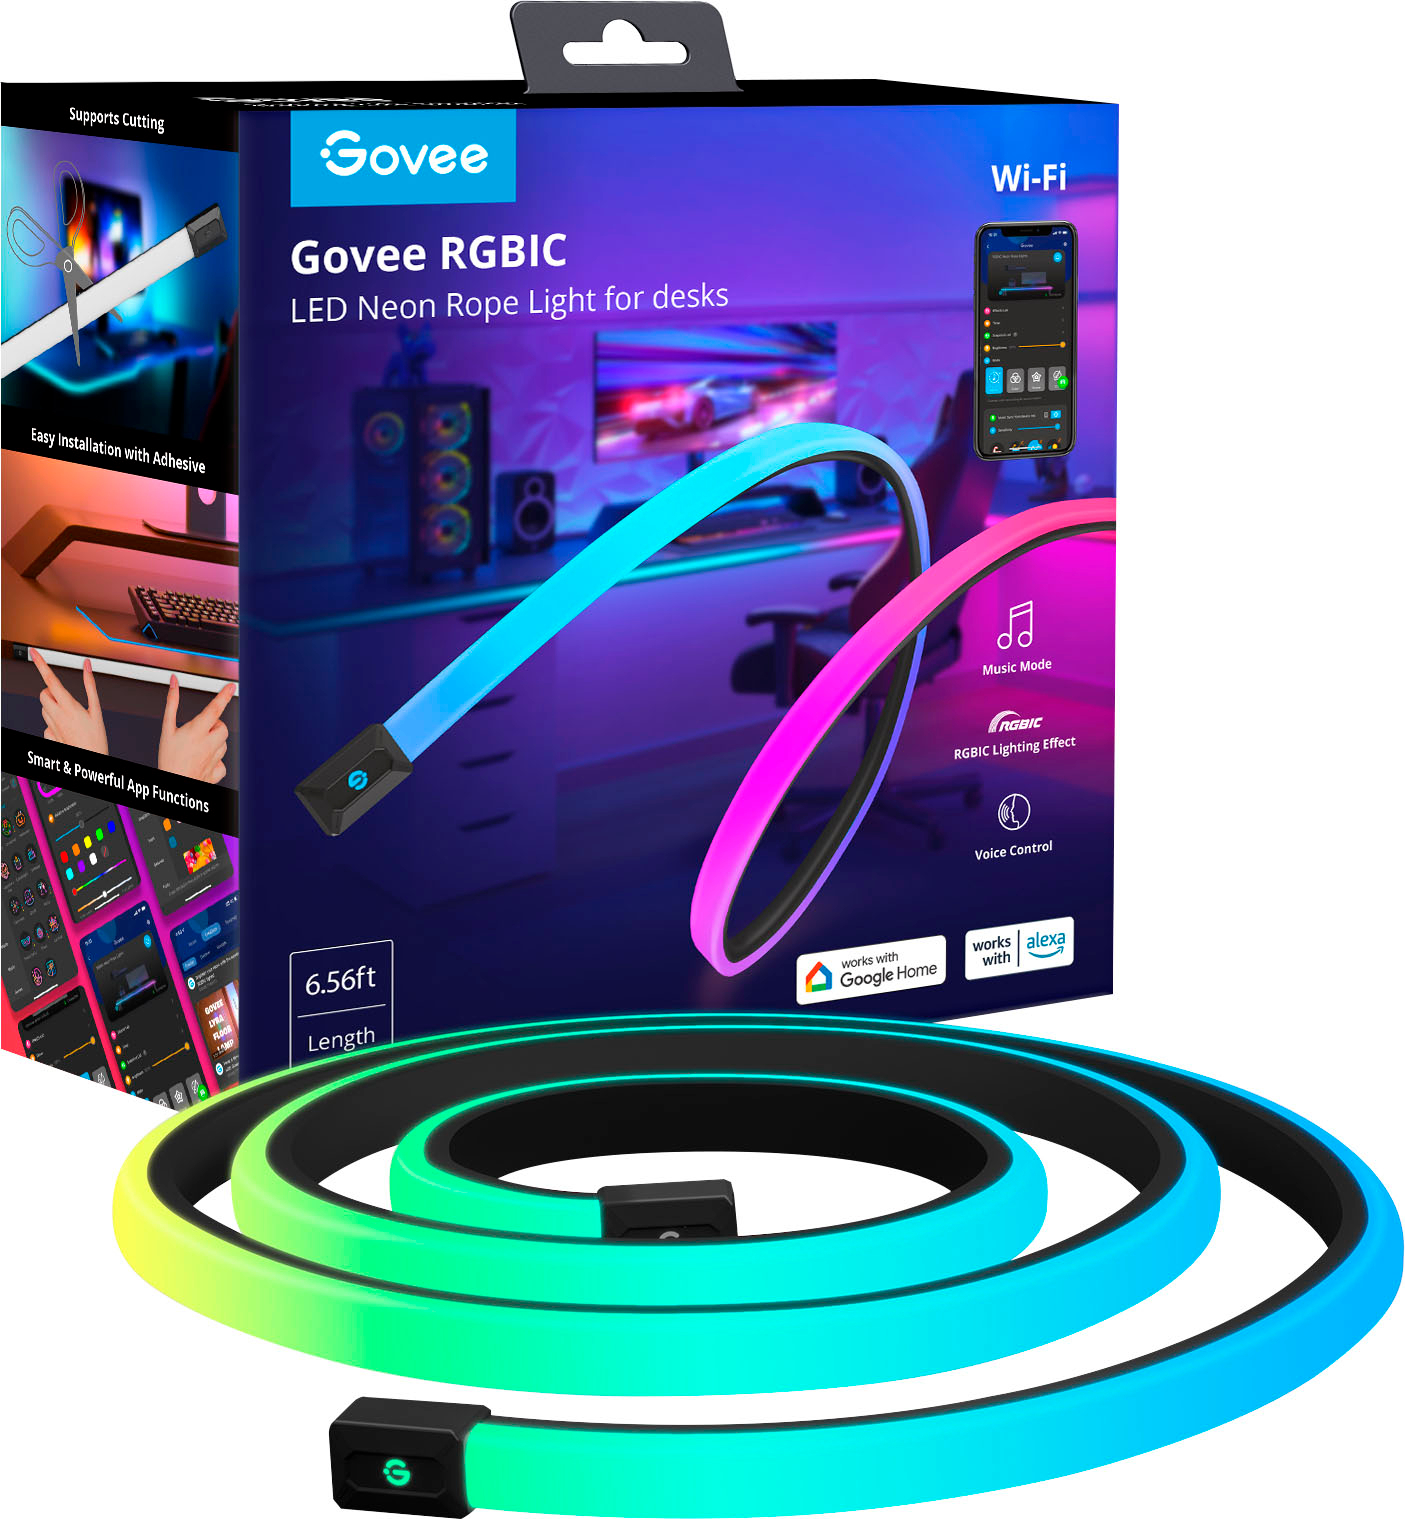 Govee RGBIC Gaming Lights, 10ft Neon Rope Lights Soft Lighting for Gaming  Desks, LED Strip Lights Syncing with Razer Chroma, Support Cutting, Smart